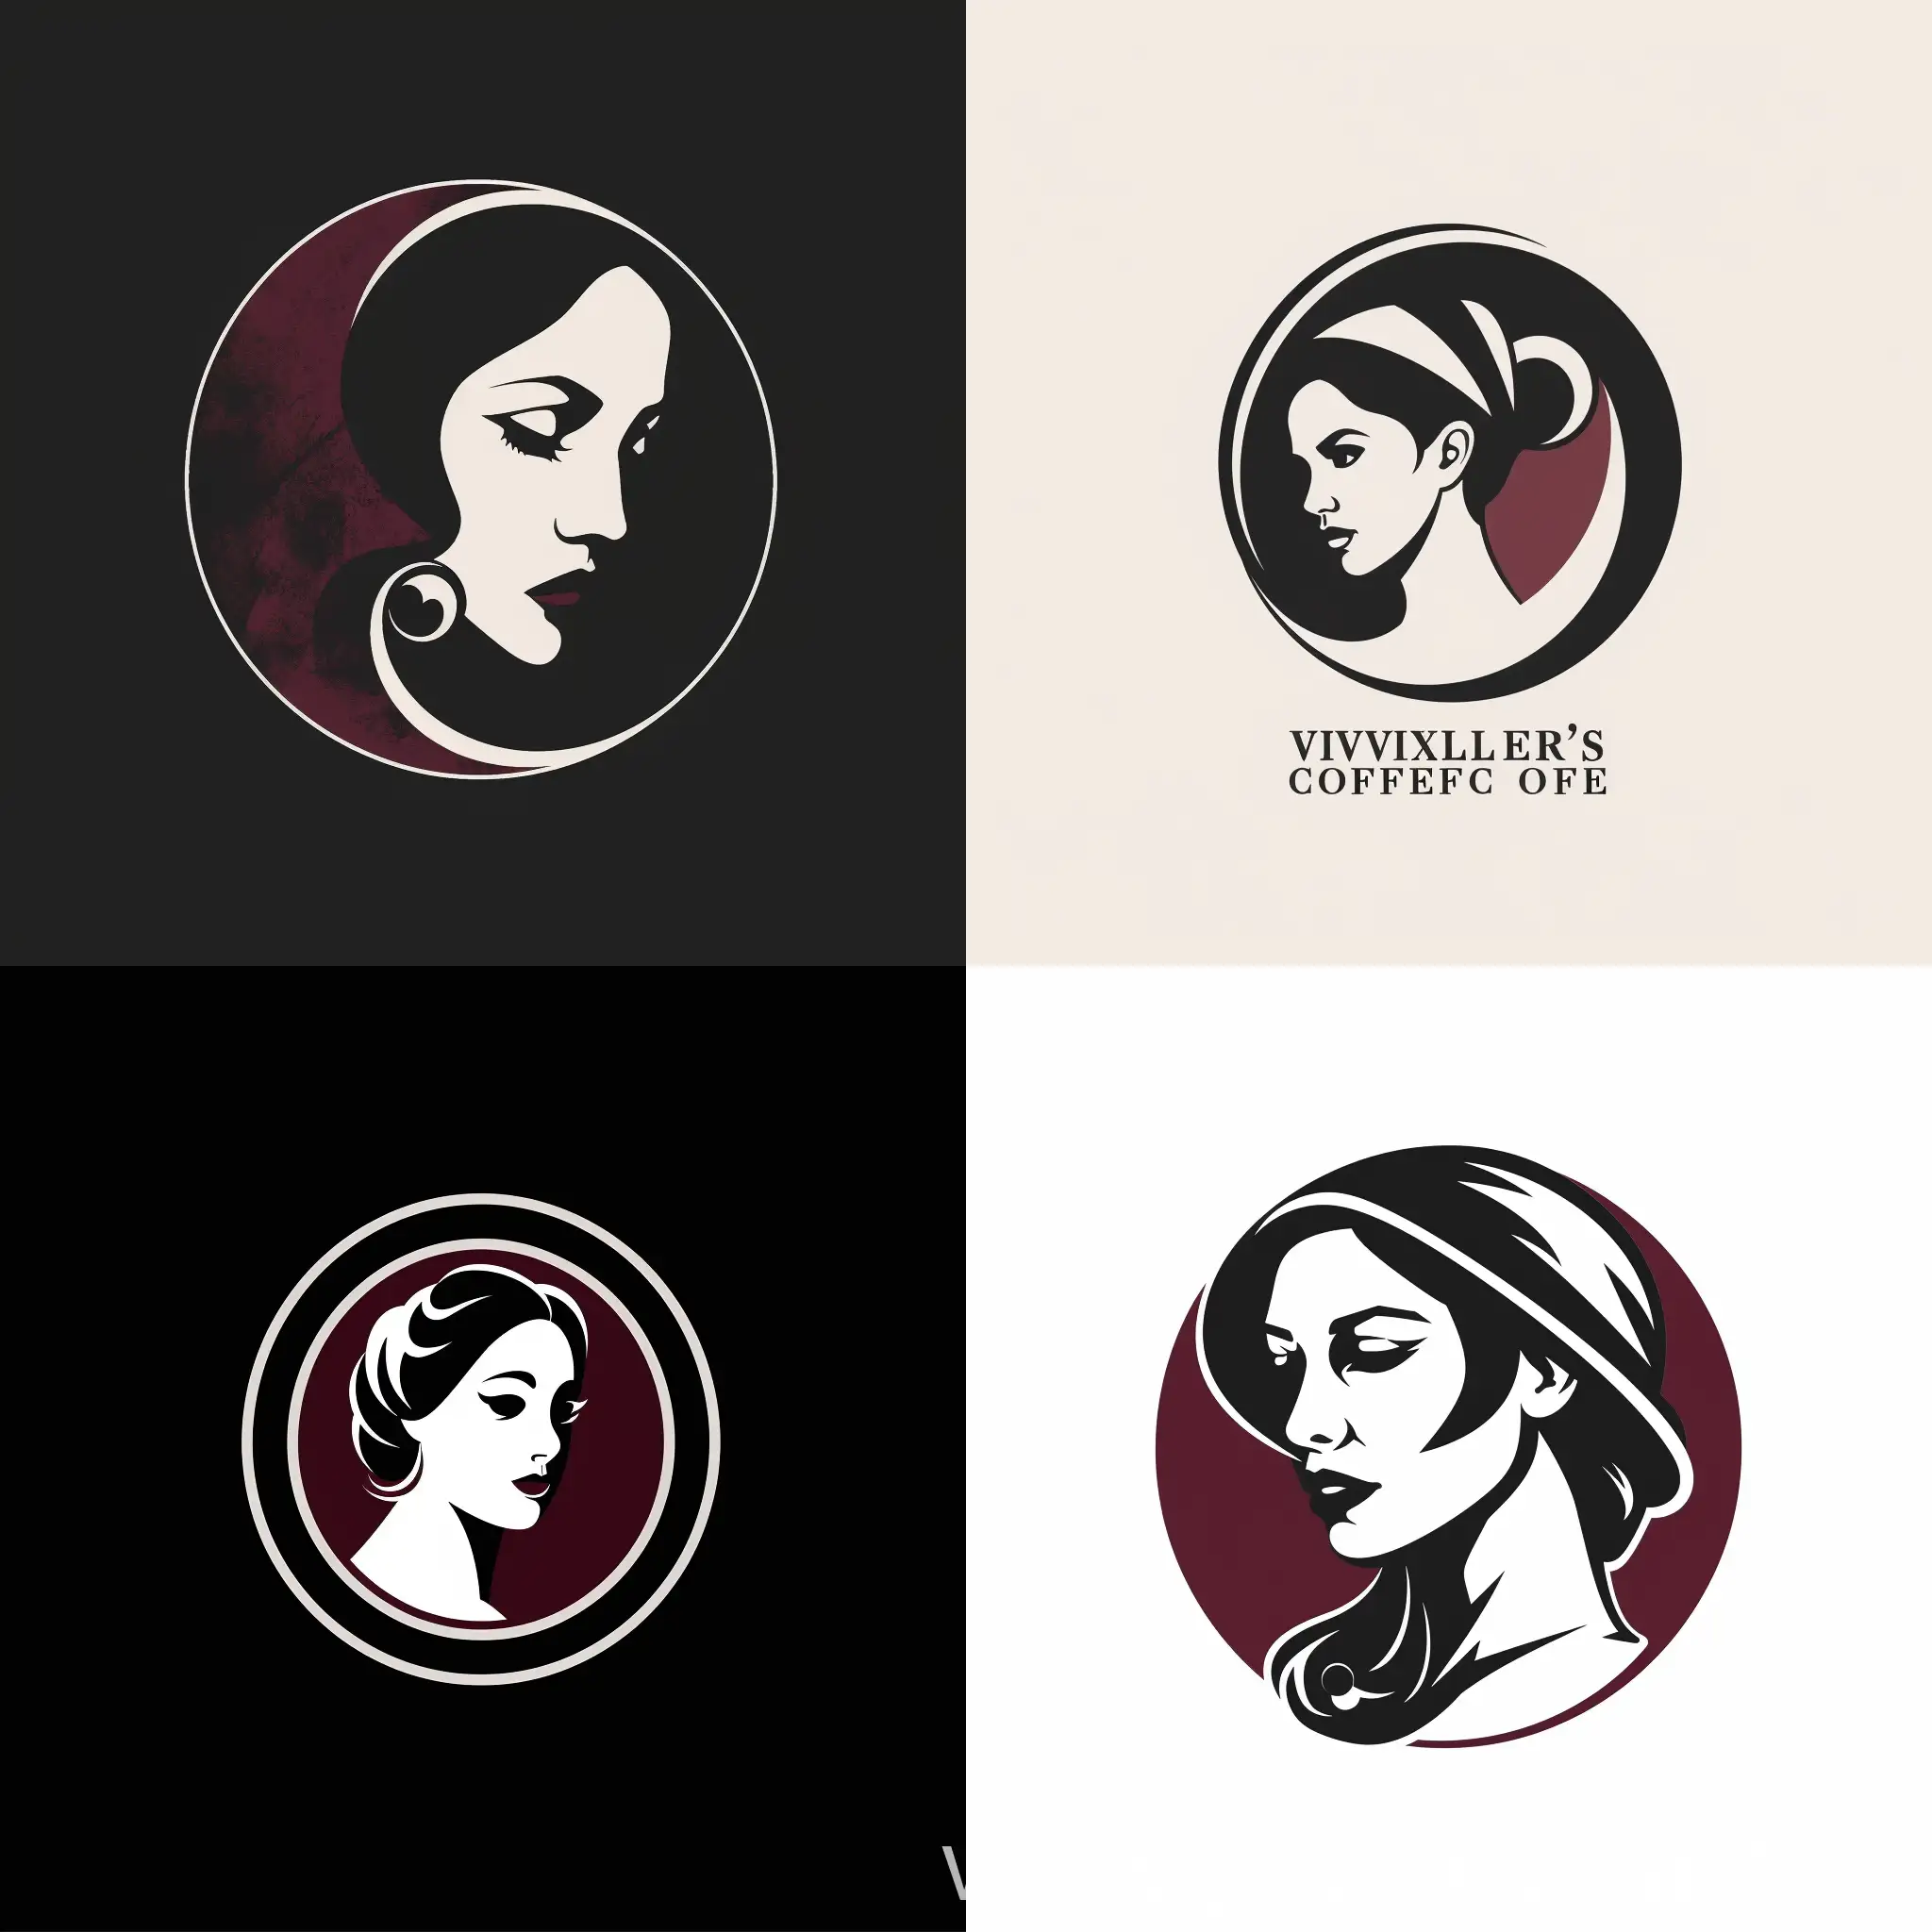 LOGO Design For Victorias Coffee Elegant Chapolera Lady Portrait in Circle Black White and Burgundy Palette  Subject: Inspiration Behind the Logo Design Victoria's Coffee logo draws inspiration from Colombia's rich coffee culture, particularly honoring the chapoleras, women who handpick coffee beans. The chapolera lady's portrait symbolizes tradition, authenticity, and dedication to quality.  Subject: Symbolism of Colors and Graphics The black, white, and burgundy palette conveys sophistication, elegance, and a timeless appeal. Black symbolizes strength and professionalism, white represents purity and quality, while burgundy evokes warmth and richness, reminiscent of freshly brewed coffee.  Subject: Detailed Explanation of Design Elements The chapolera lady's face as the main symbol signifies the human touch and craftsmanship behind Victoria's Coffee. Placing her within a circle enhances a sense of unity and community, reflecting inclusivity and the shared passion for coffee.  Subject: Design Style and Trends The logo's complexity adds depth and intrigue, captivating viewers' attention and leaving a memorable impression. Its versatility allows it to be applied across various platforms, ensuring brand consistency and recognition in the competitive coffee industry.